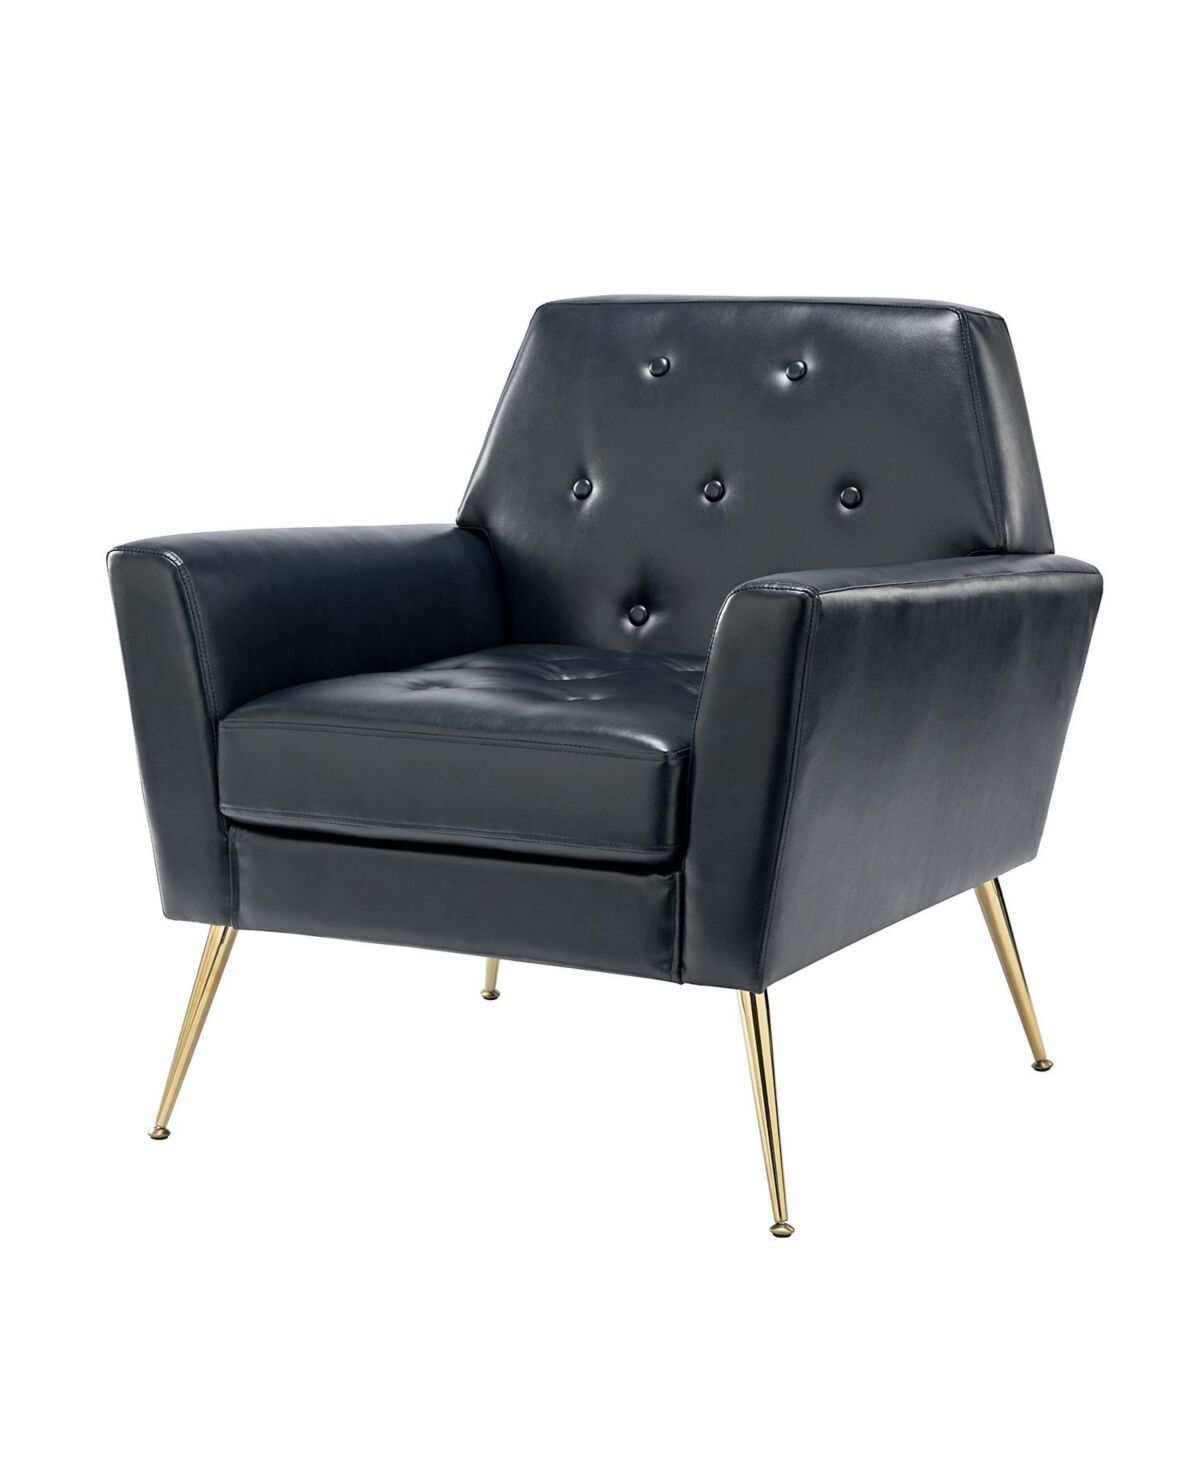 Hulala Home Modern Faux Leather Accent Chair for Living Room Bedroom - Navy